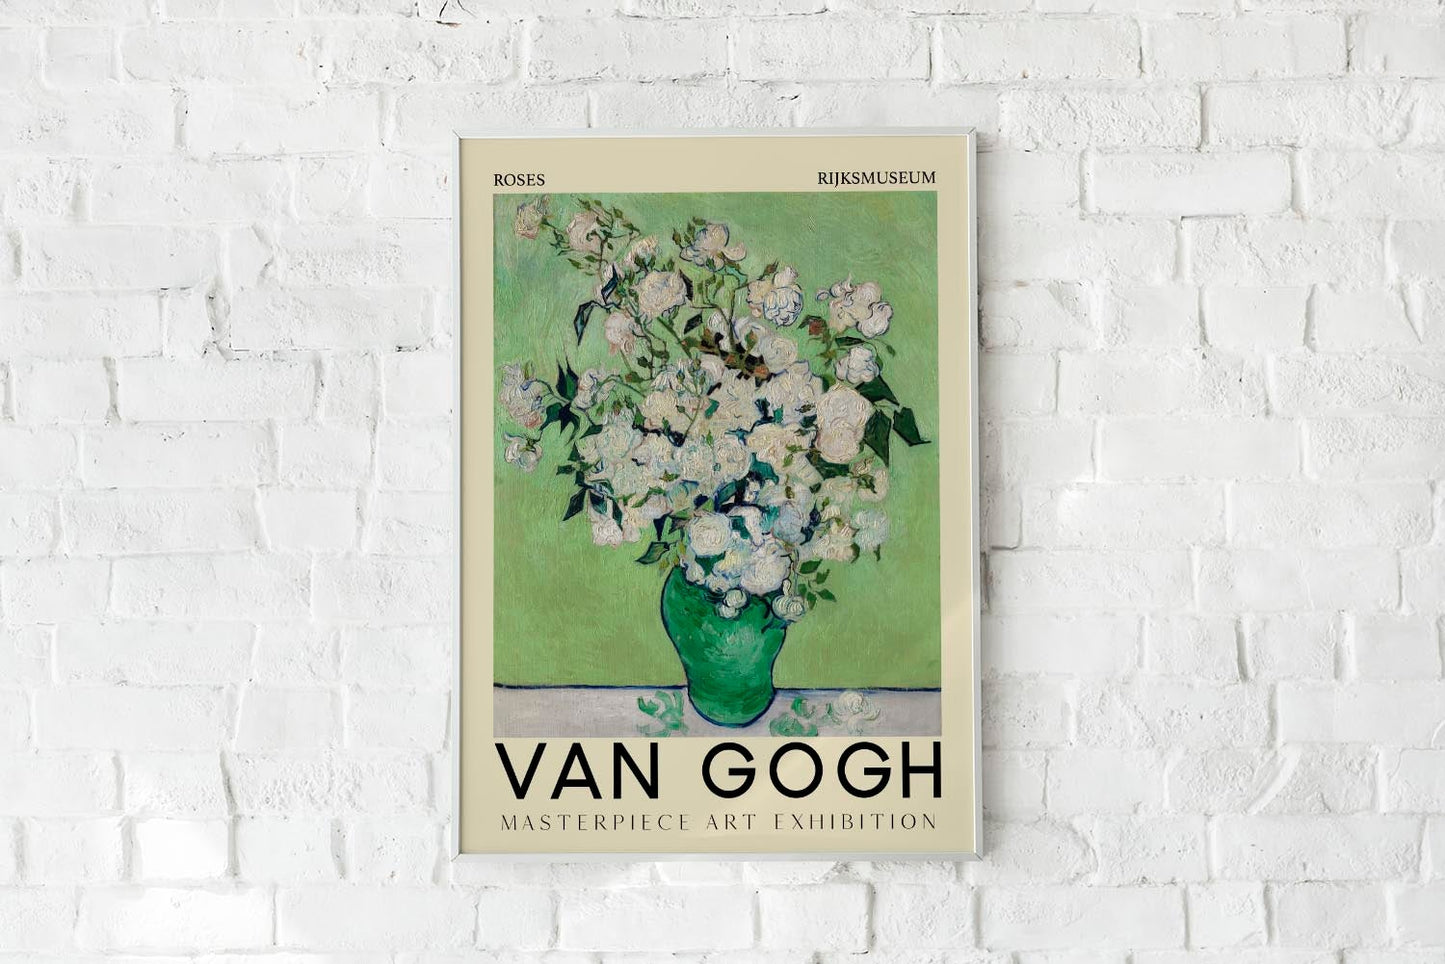 Roses by Vincent Van Gogh, Exhibition Poster